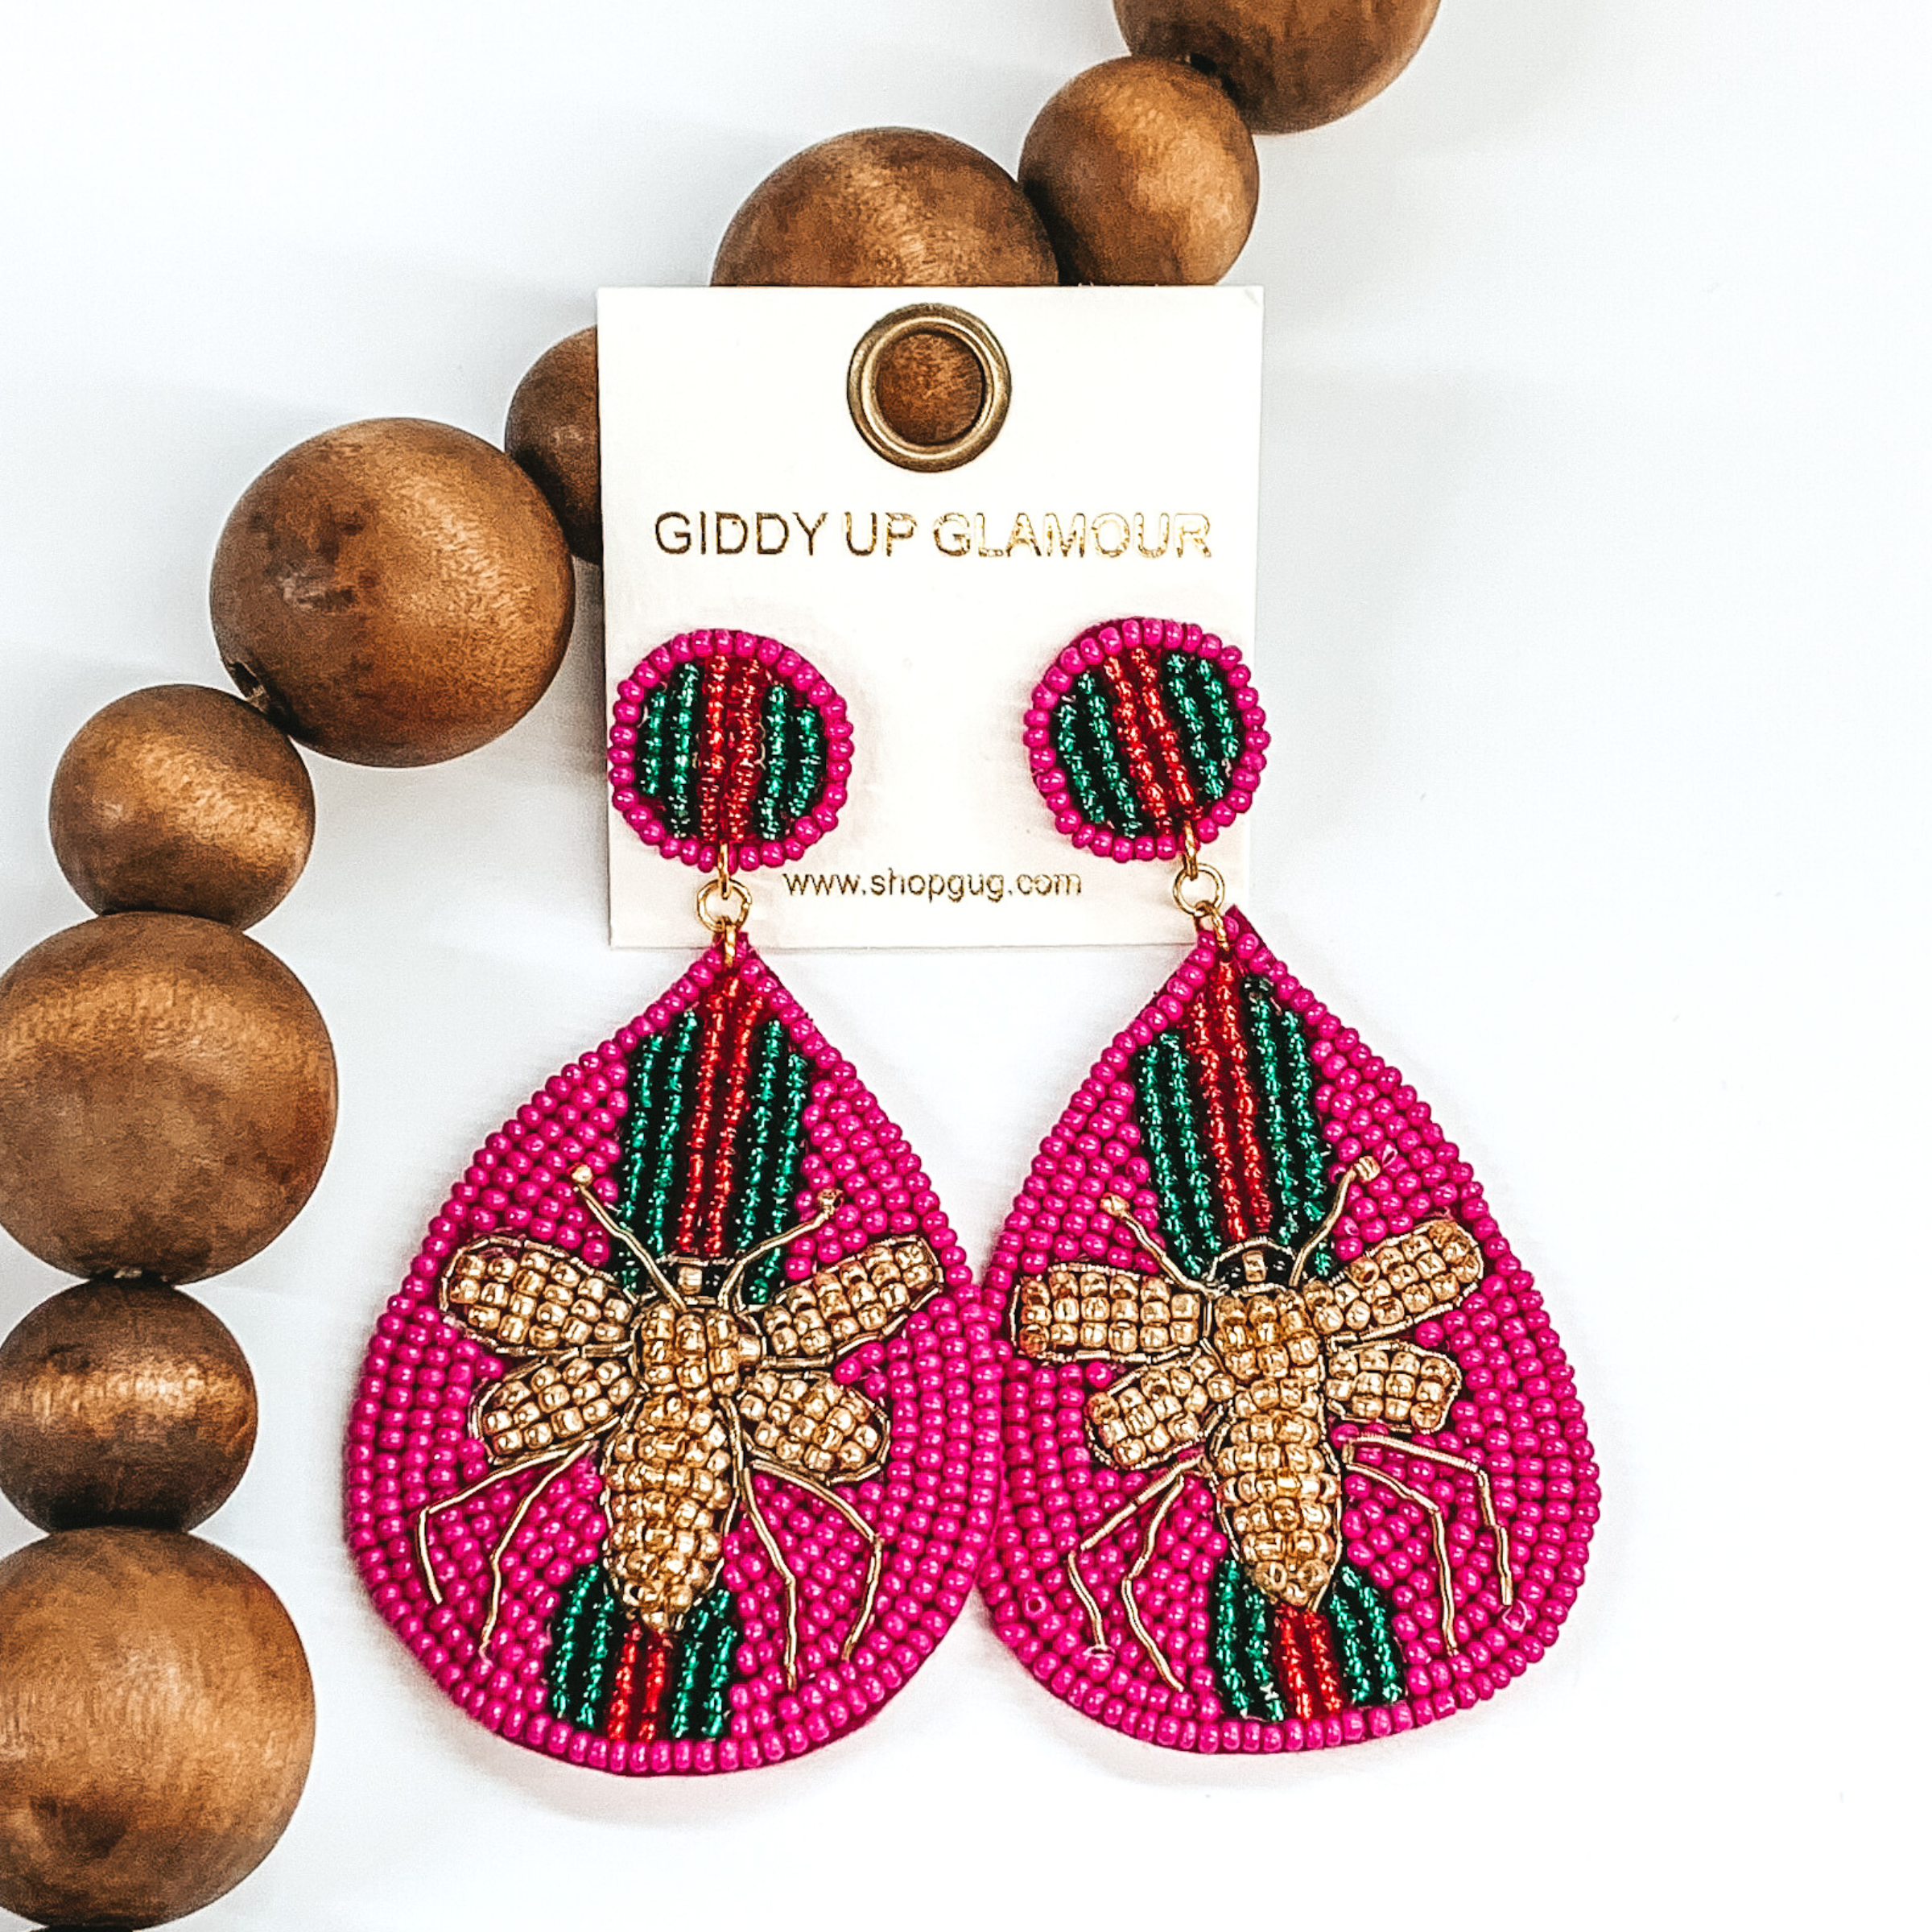 Circle beaded studs with a beaded teardrop dangle. The majority of the beads were fuchsia with green and red stripes. The center of the teardrop was a gold beaded bee. These earrings are pictured on a white background with dark brown beads.